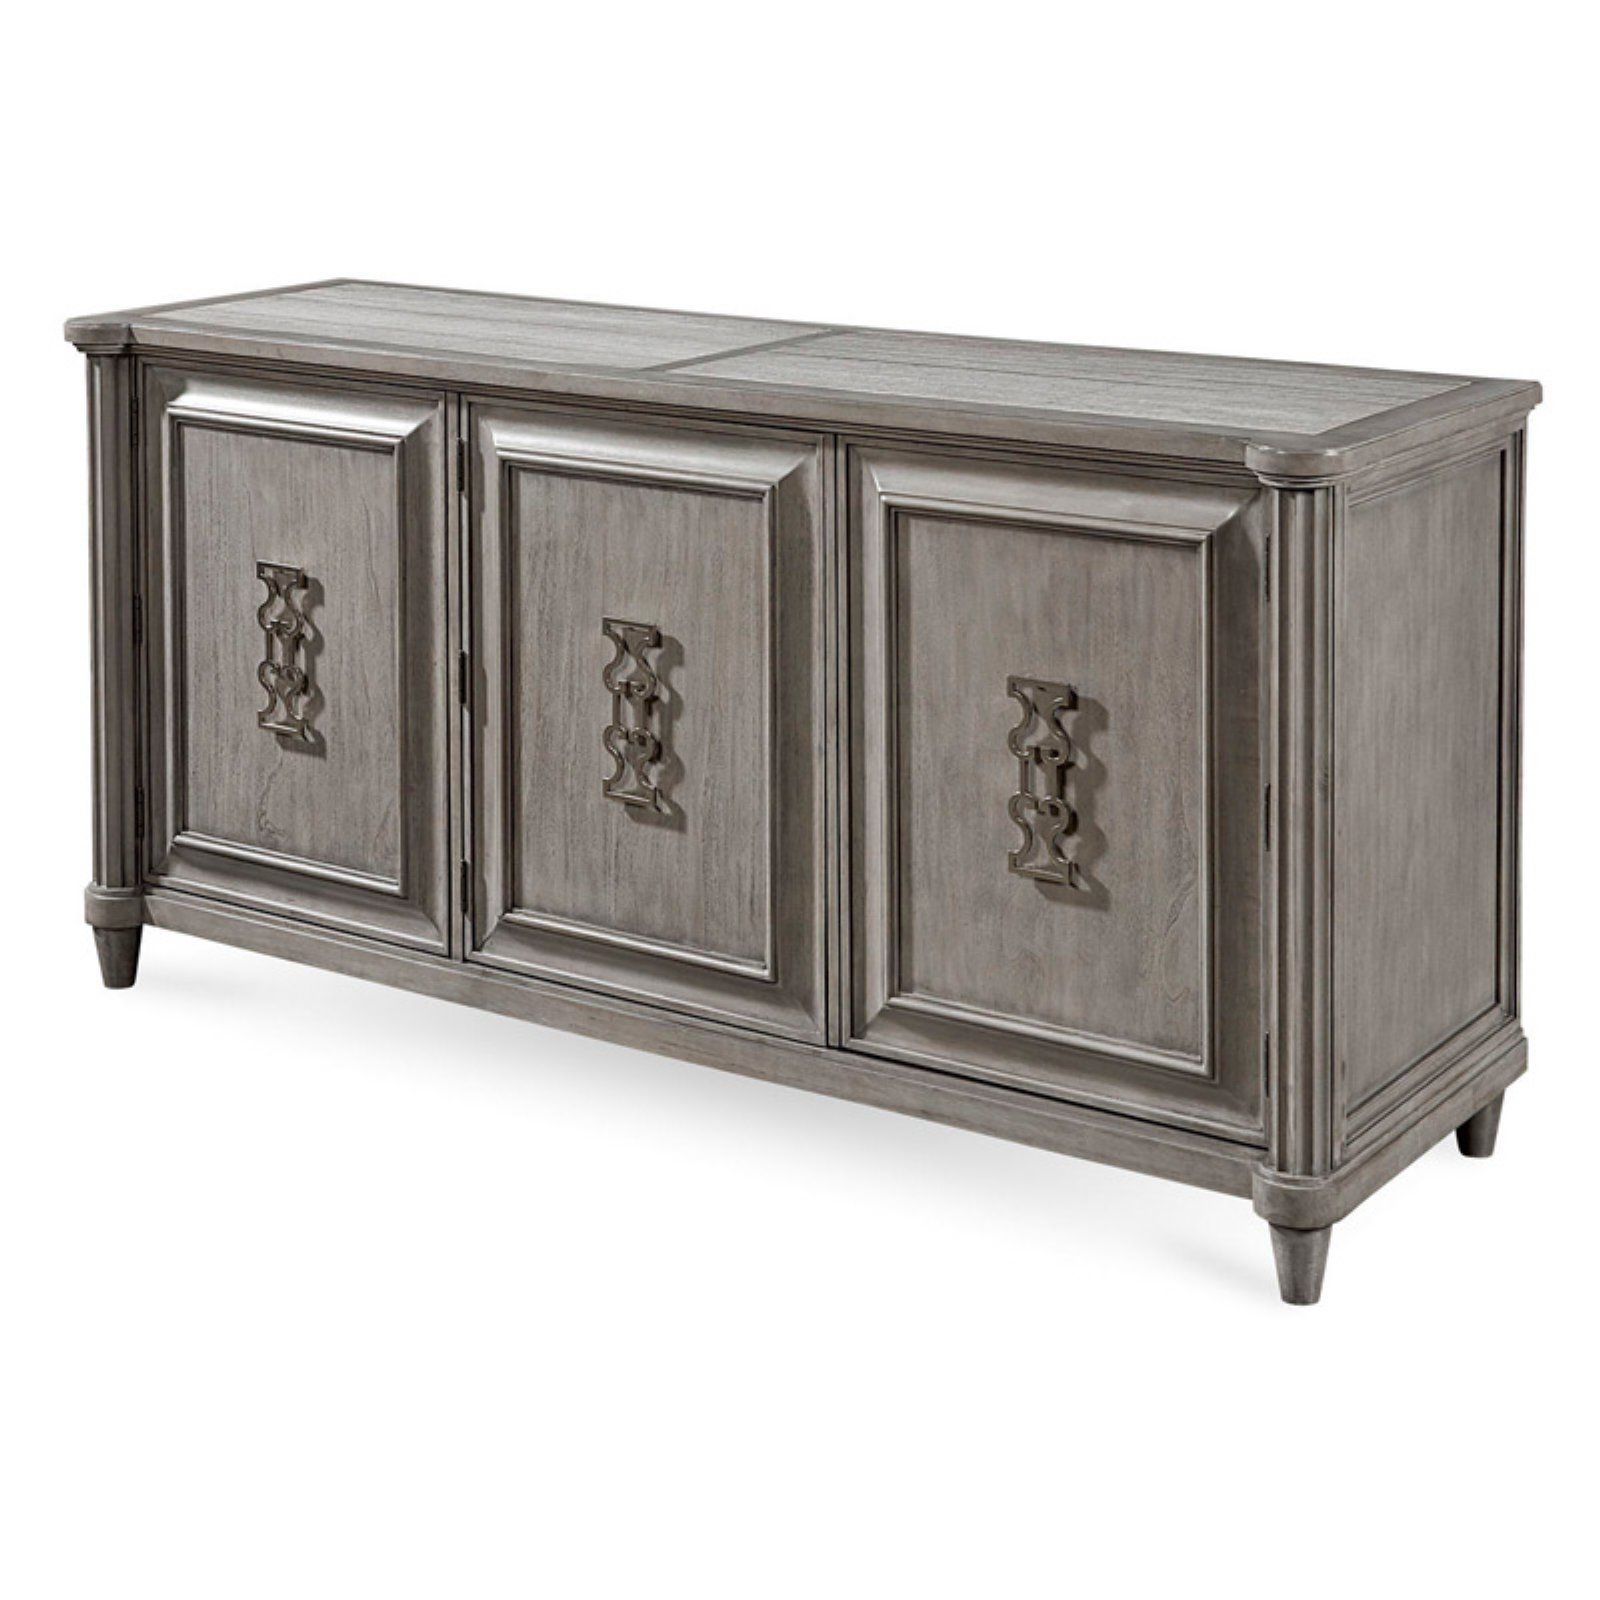 A.r.t. Furniture Morrissey Eccles Credenza Smoke | Products Within Melange Brockton Sideboards (Gallery 6 of 20)